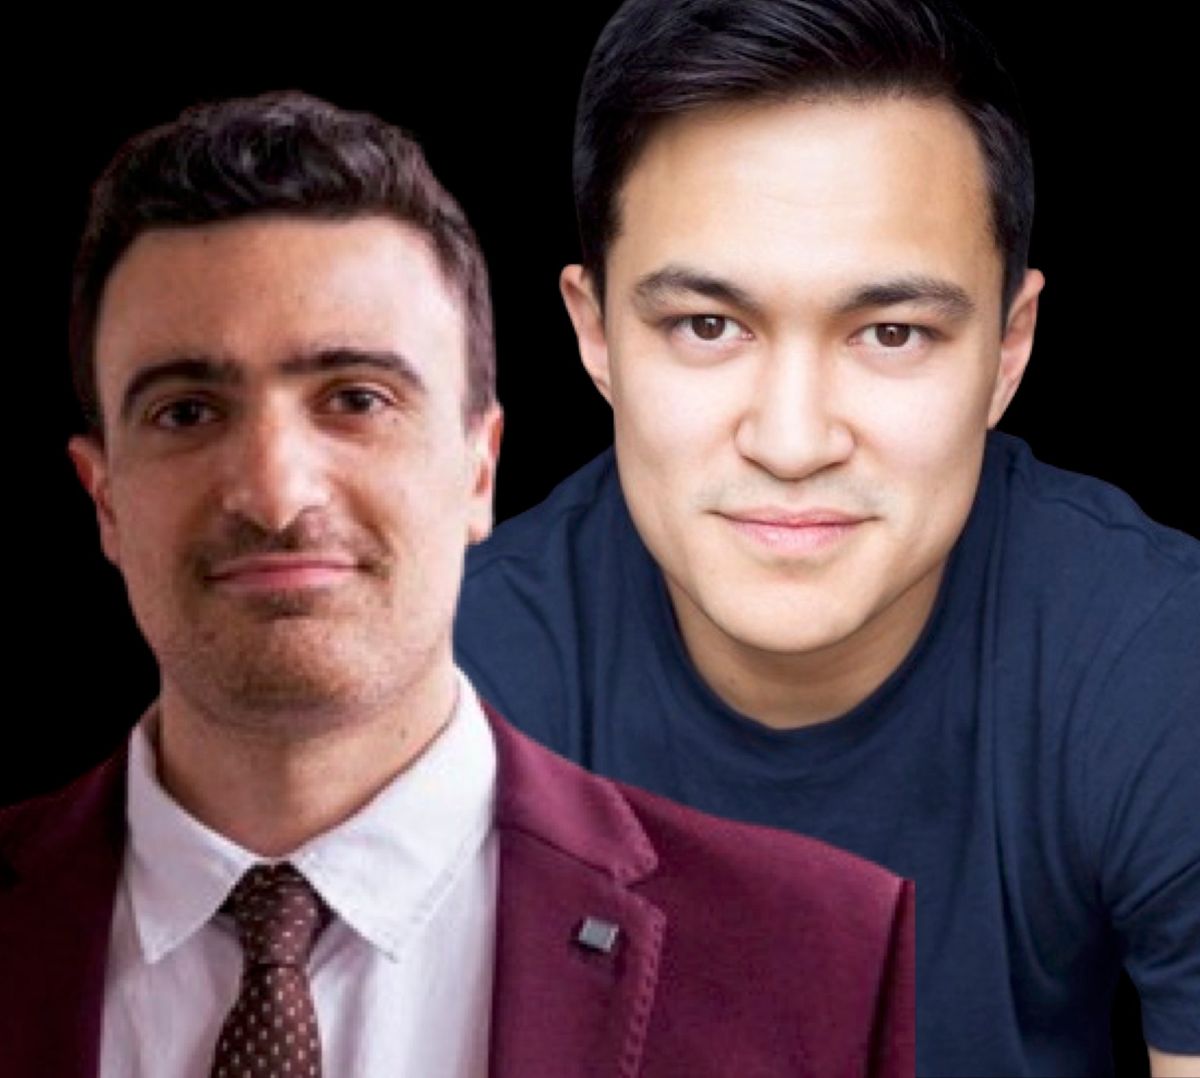 Claire's petit cabaret presents: JULIAN KUO AND DAVID ALLEN